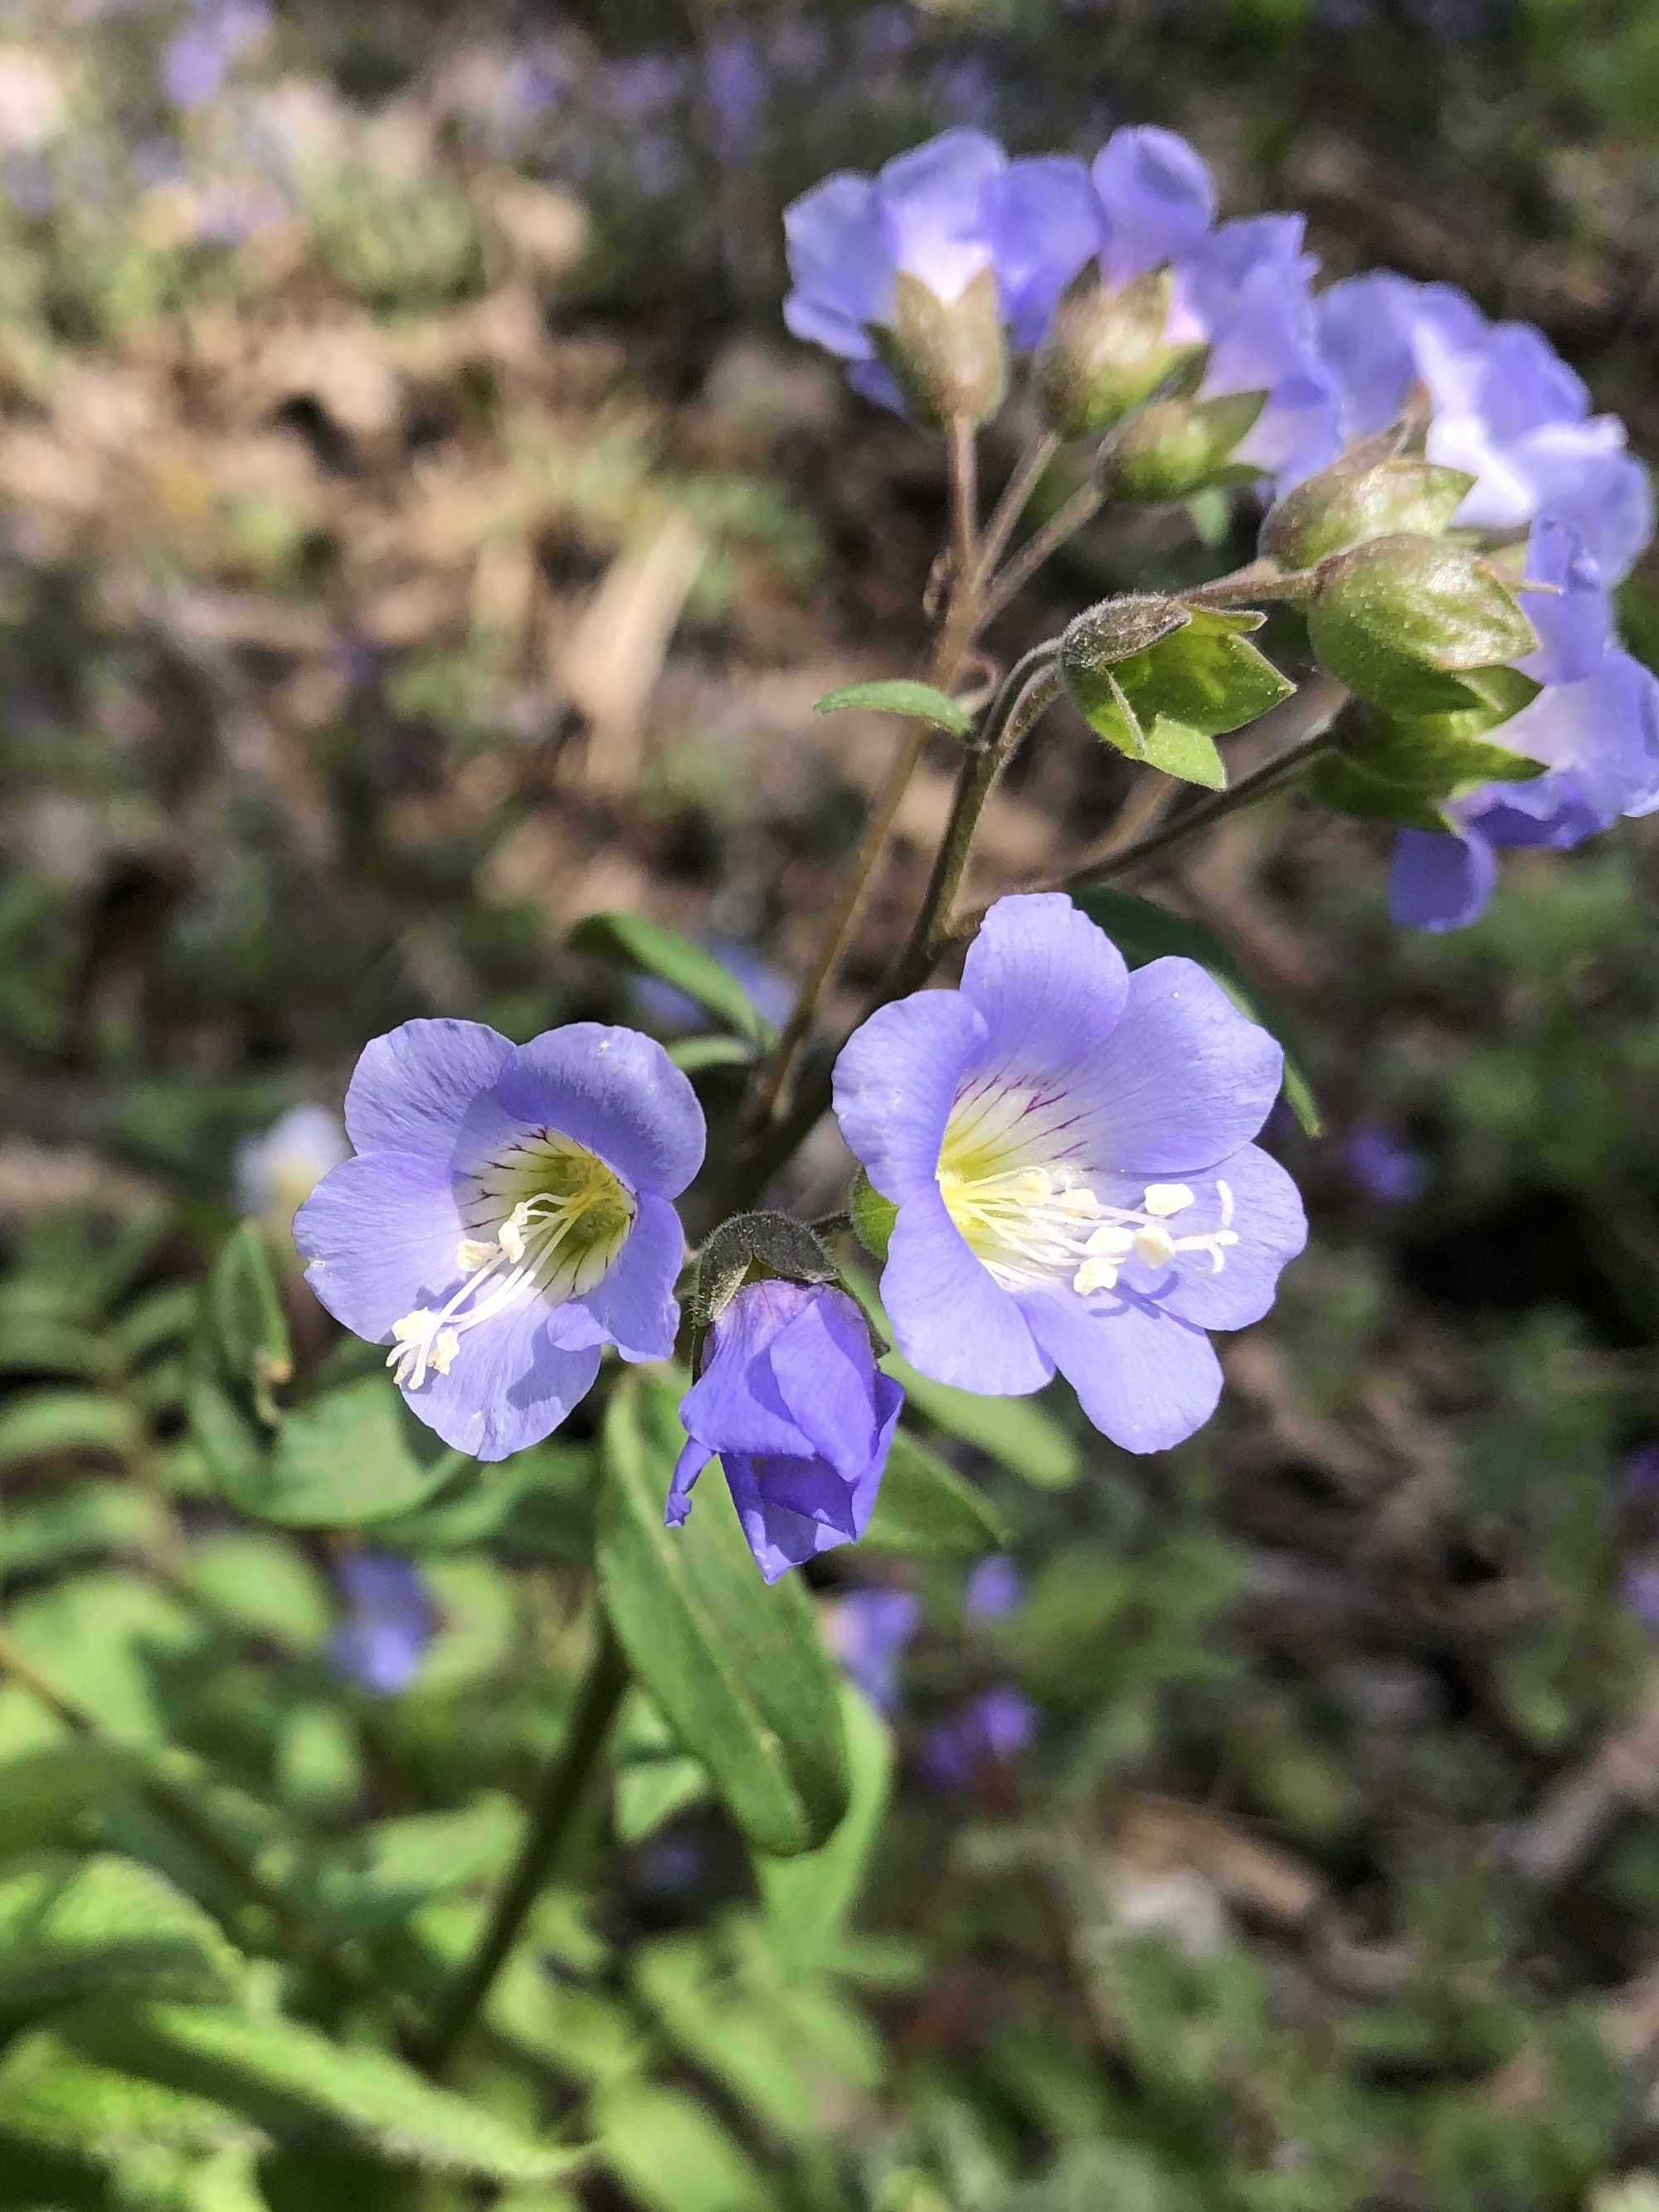 Jacob's Ladder in Oak Savanna in Madison, Wisconsin on May 2, 2021.